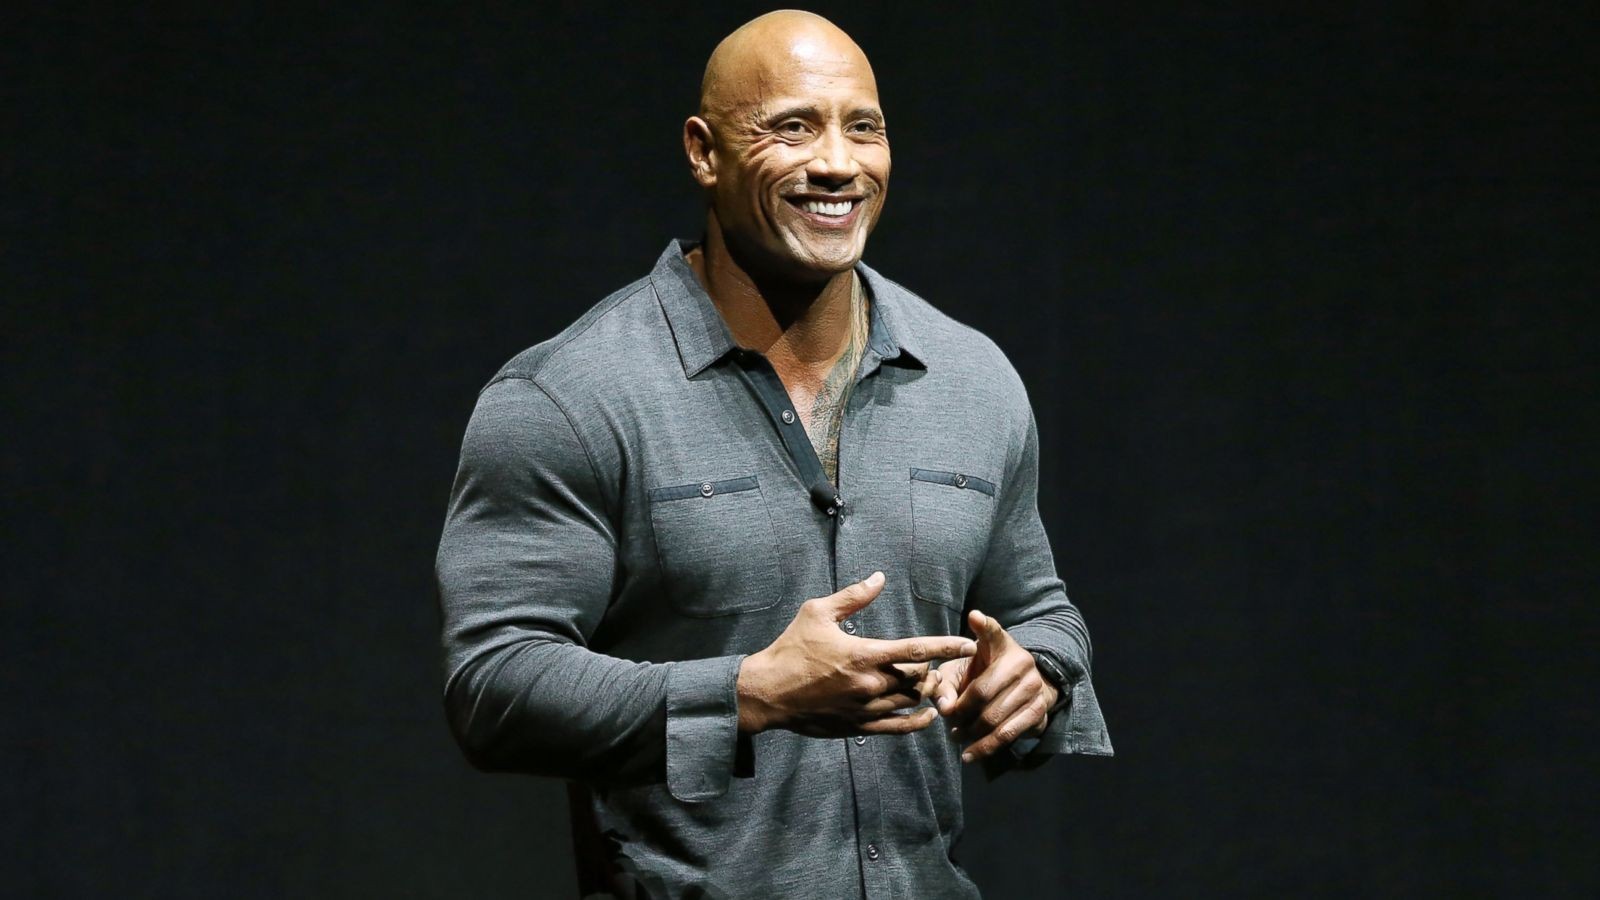 The cheery Dwayne Johnson has done some time.